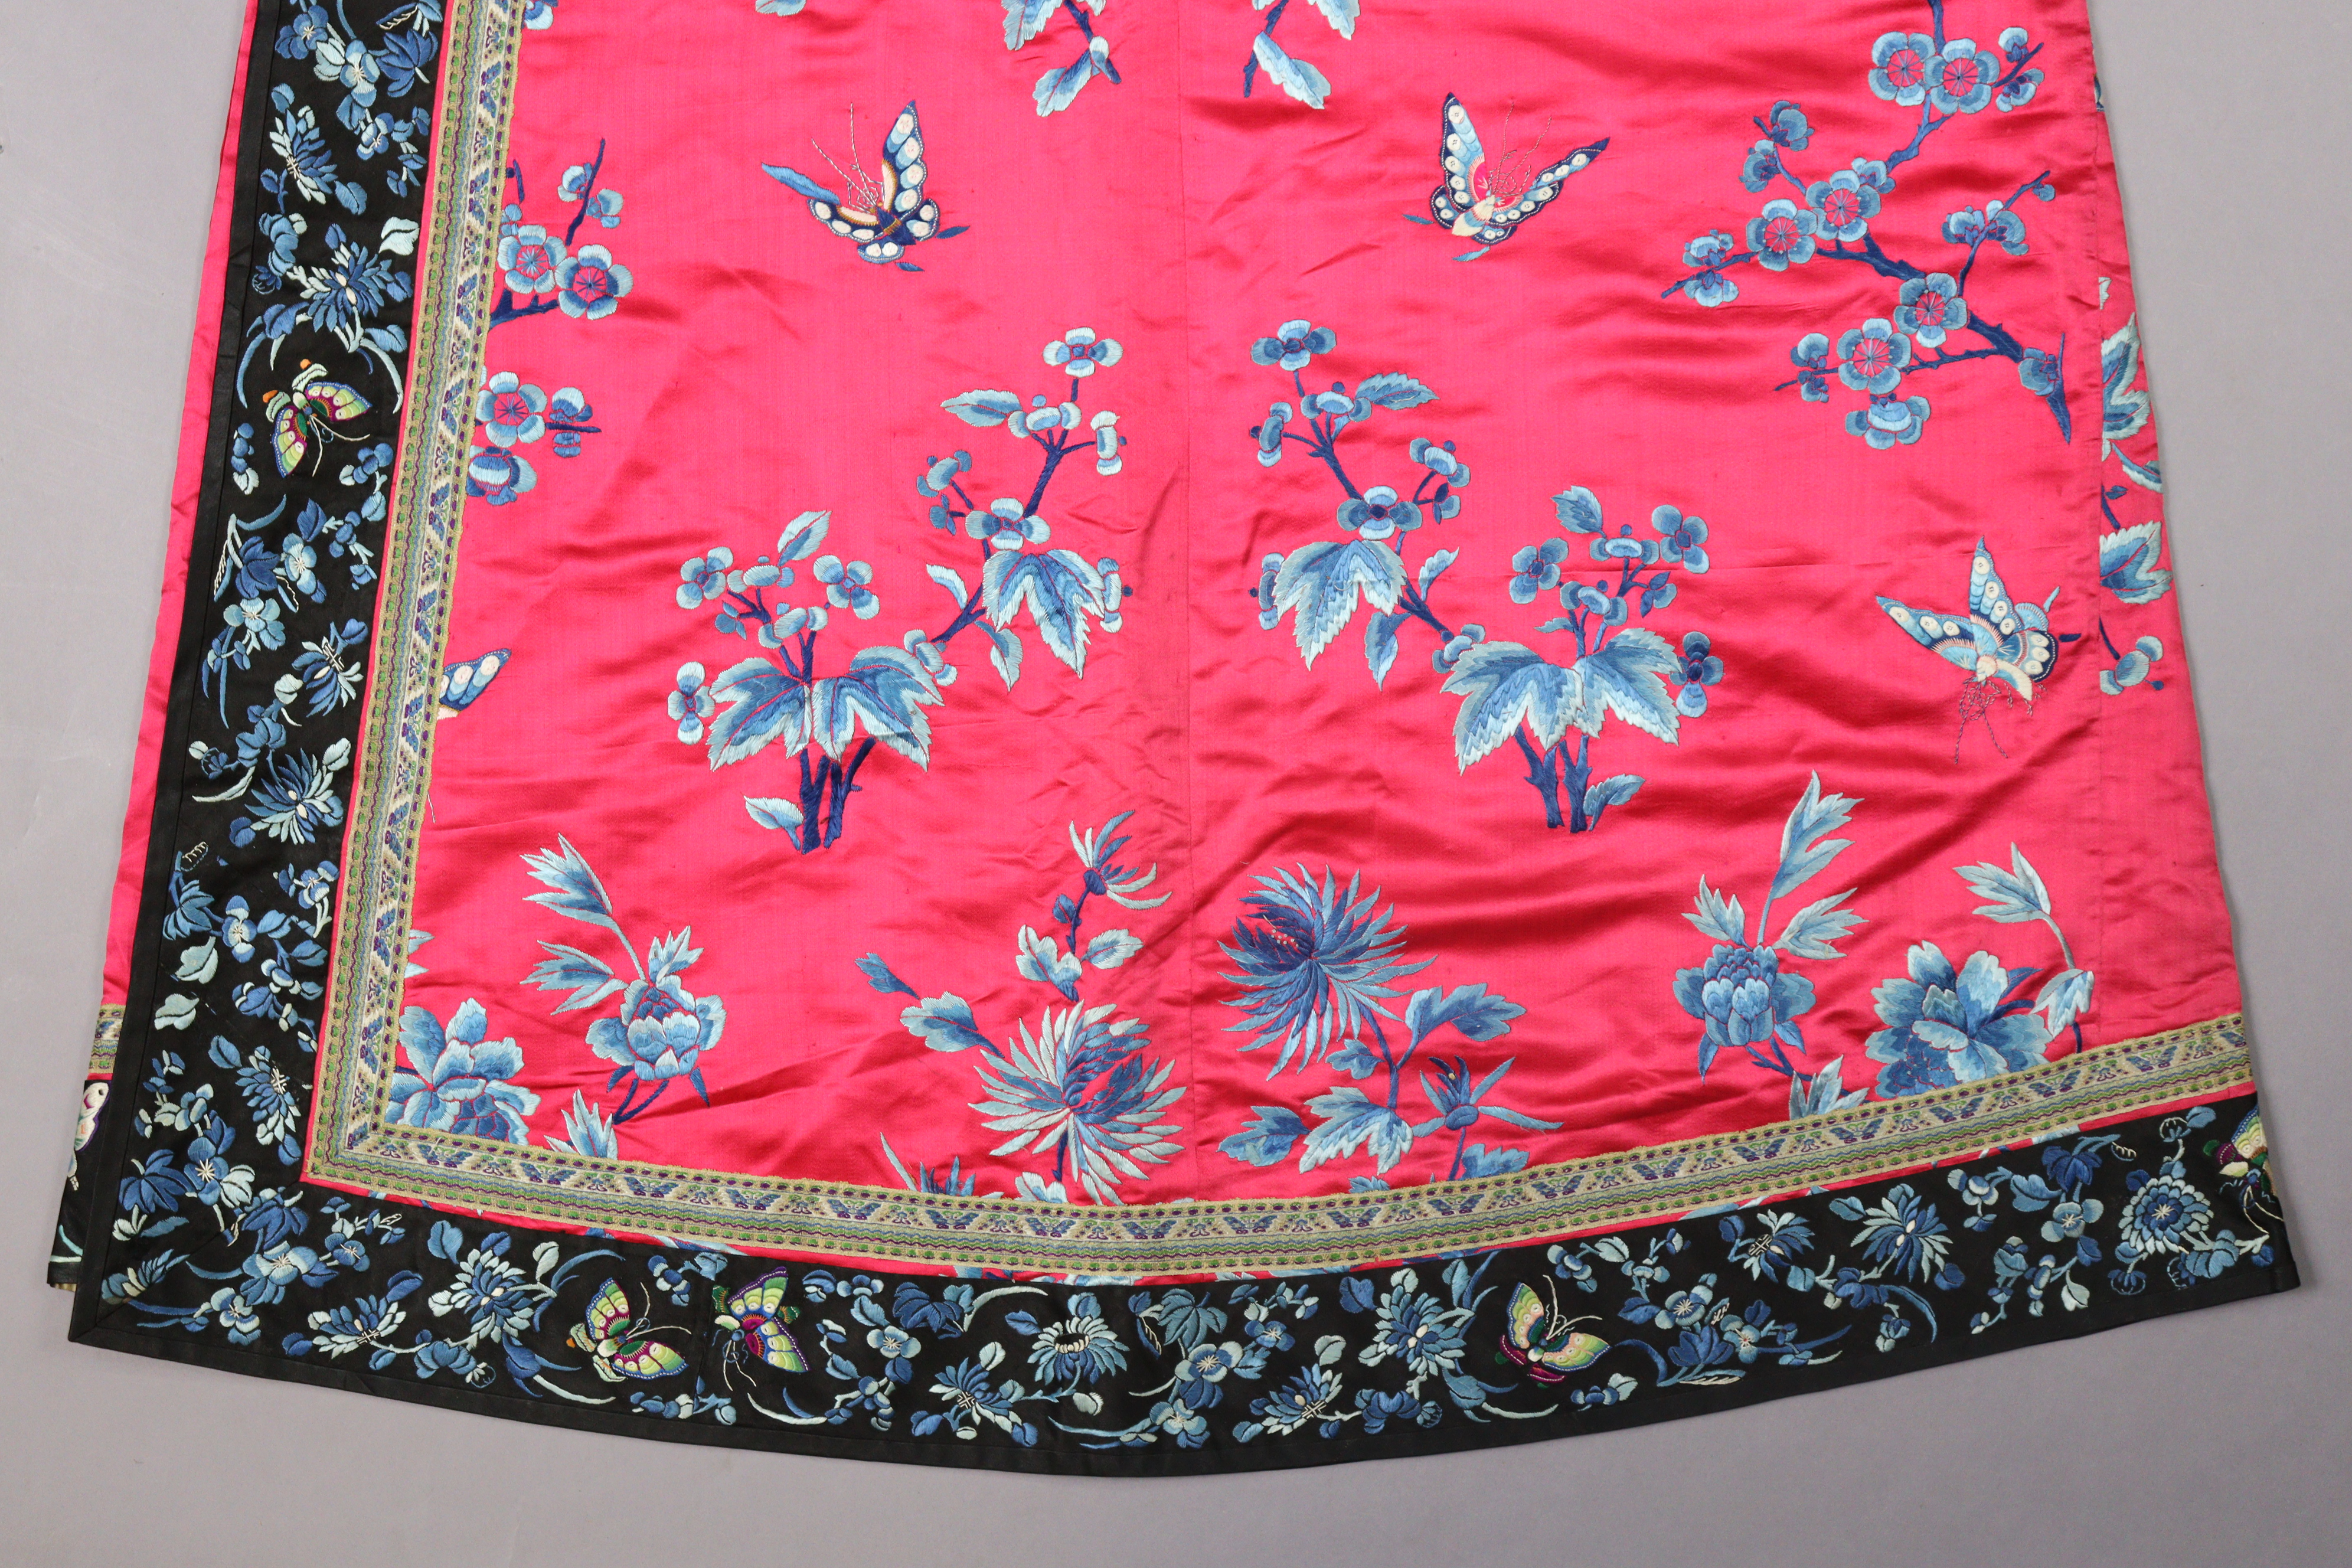 A LATE 19th CENTURY CHINESE SILK INFORMAL LADY’S ROBE, of pink ground with all-over embroidered - Image 12 of 15